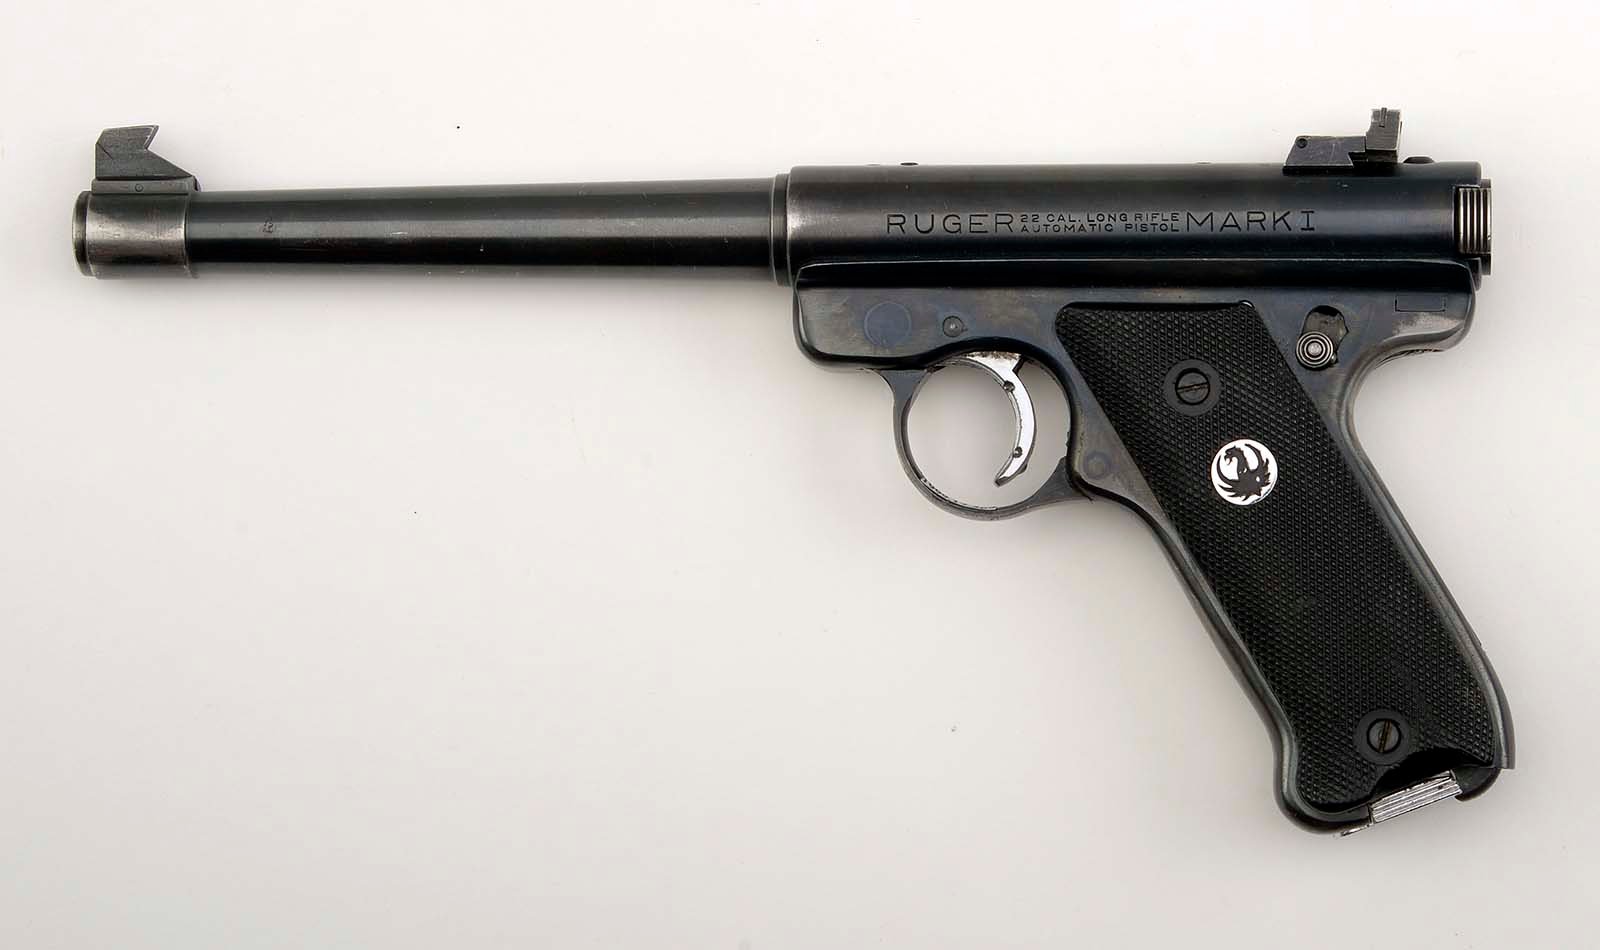 Ruger Mark 1. Gift of Janet Jerome and daughters in memory of John K. Jerome. 1999.17.368